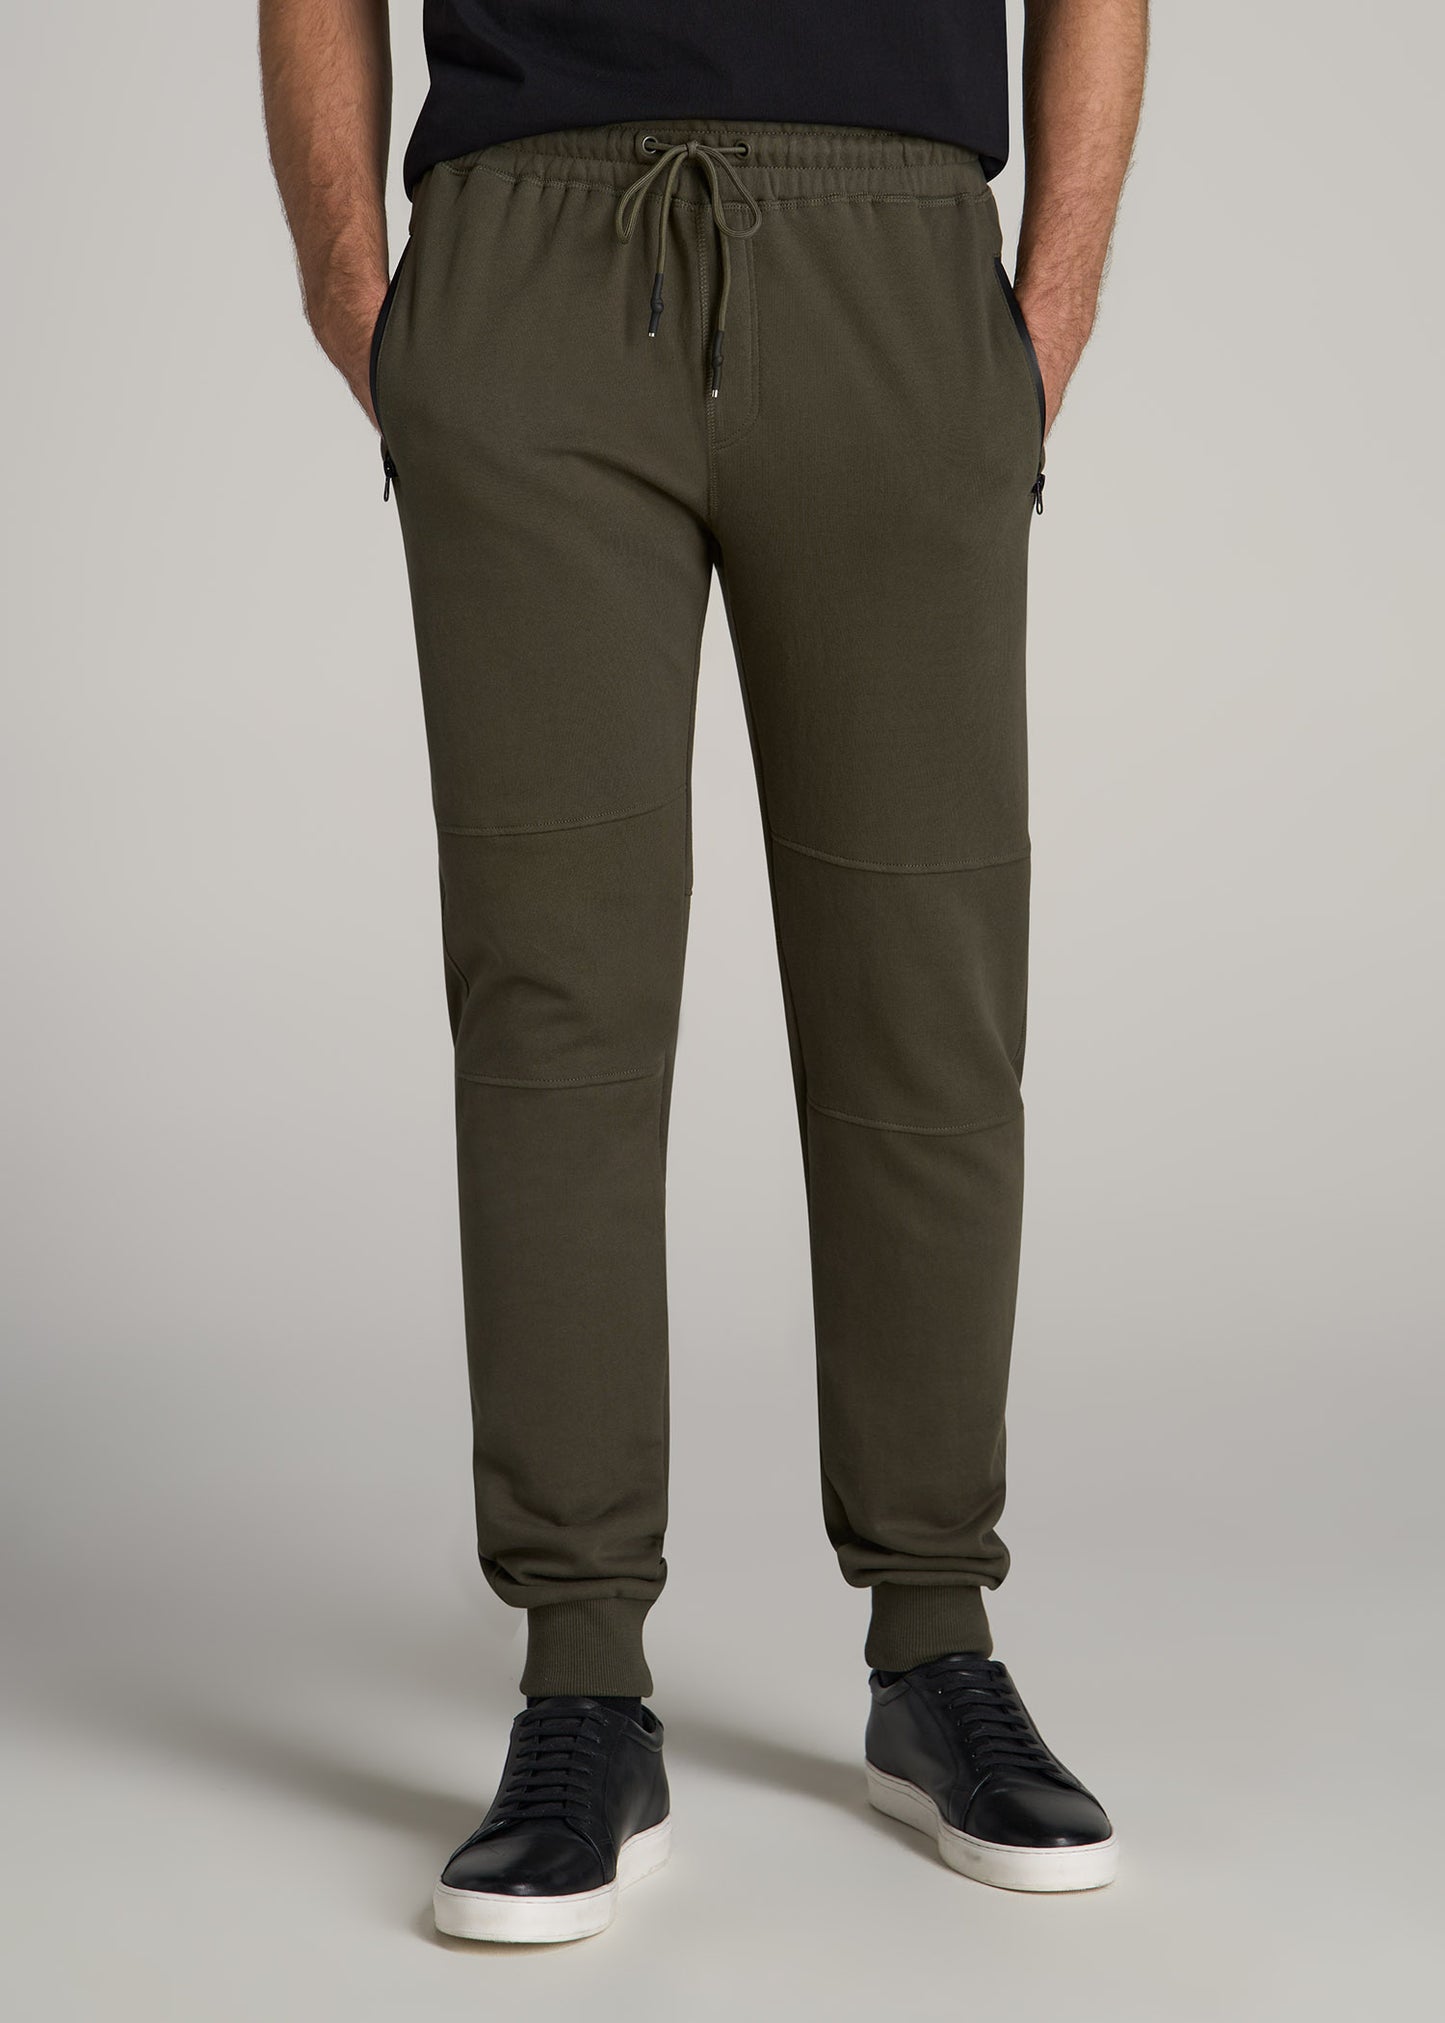 Wearever French Terry Men's Tall Joggers in Camo Green